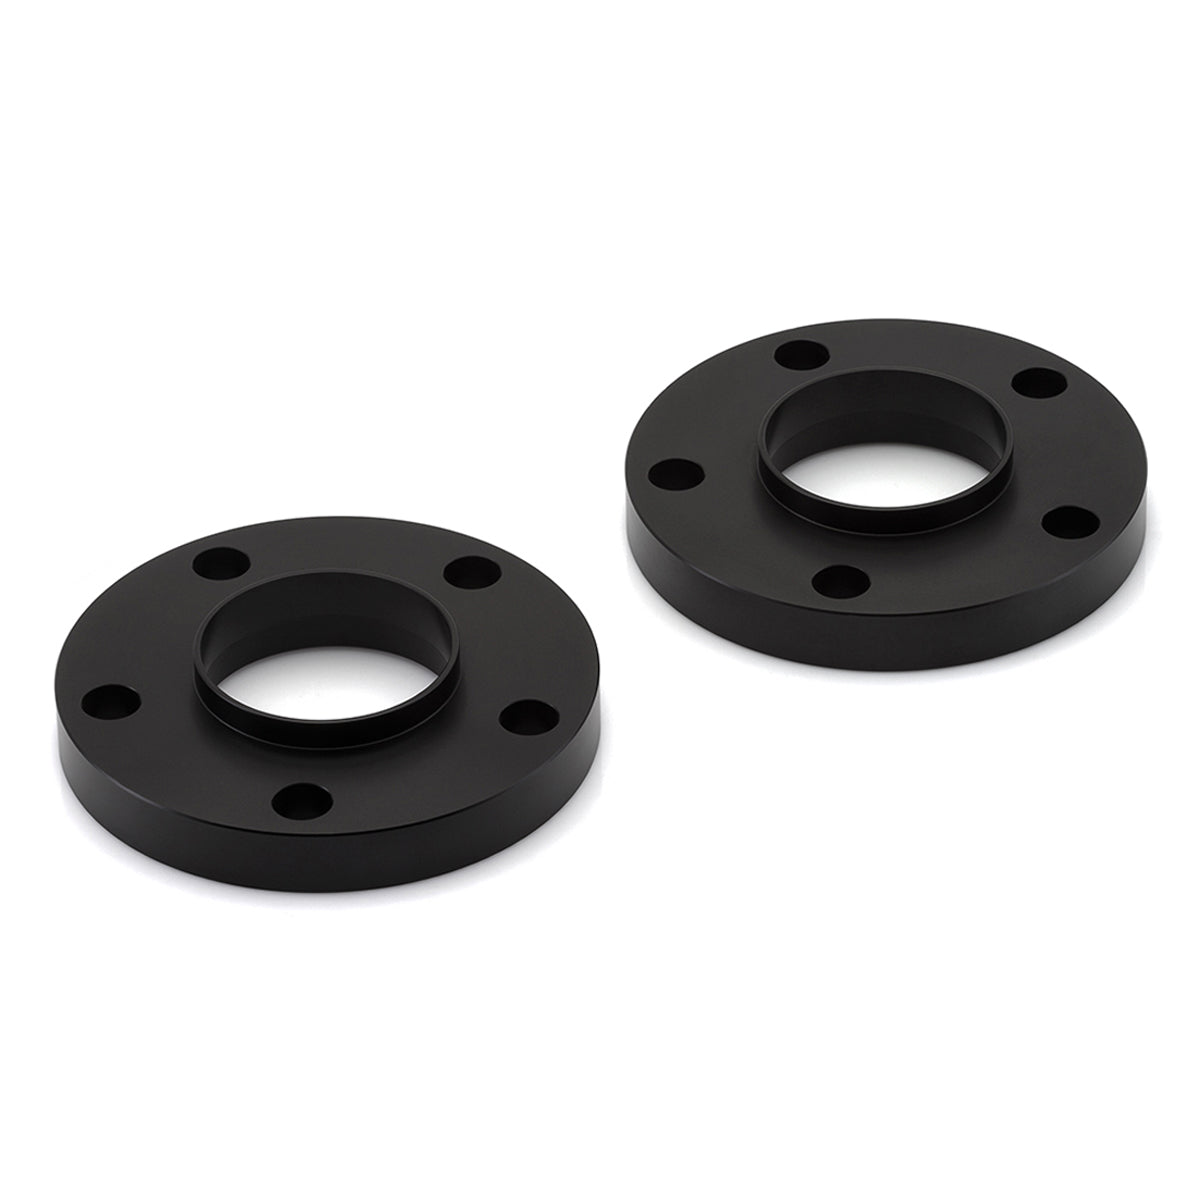 2004-2017 BMW 1 Series 5x120 Hubcentric Wheelcentric Wheel Spacers set of 2